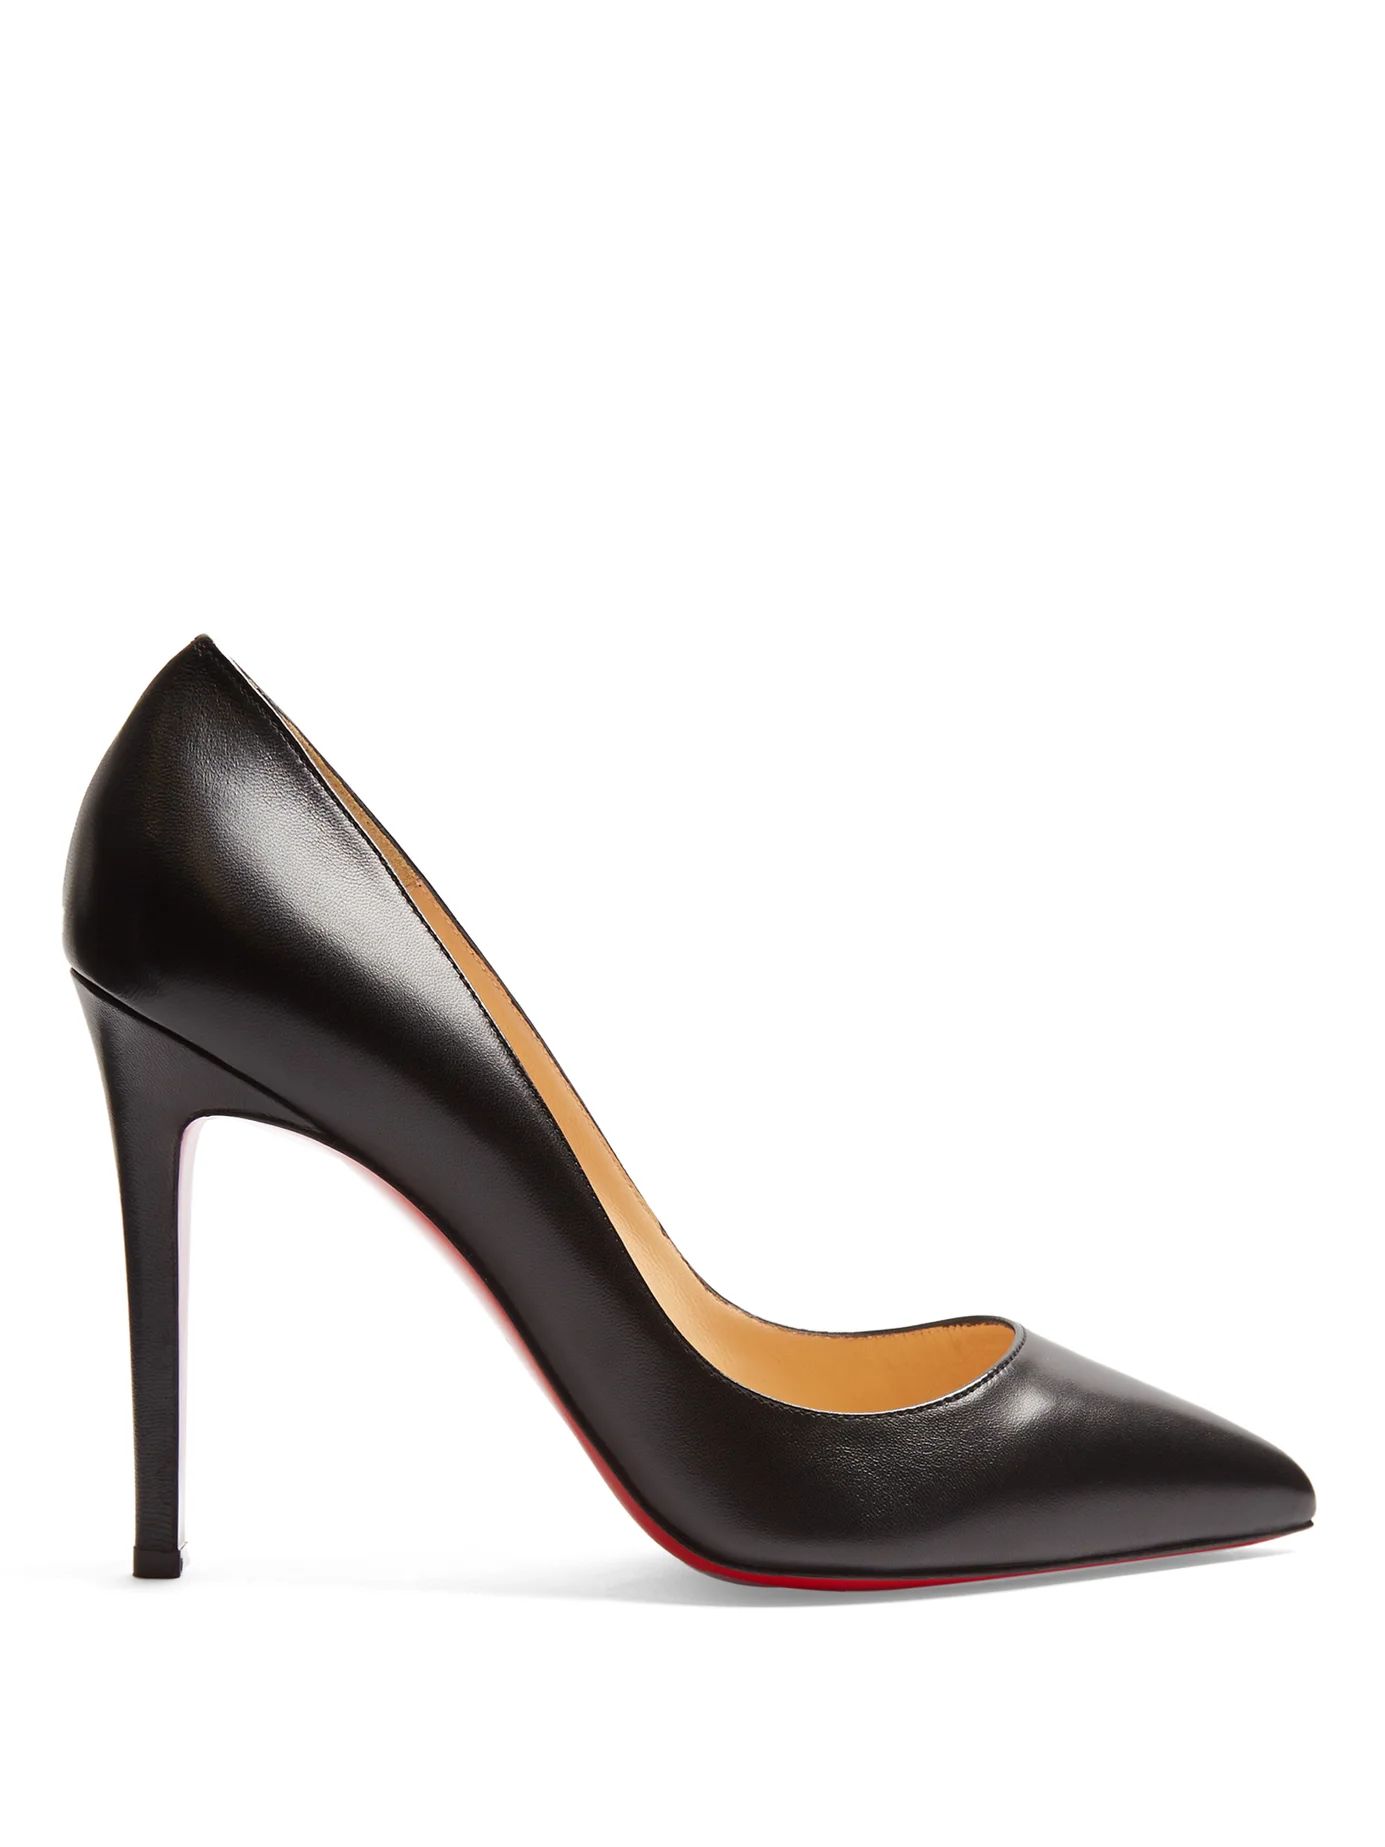 Pigalle 100mm leather pumps | Matches (US)